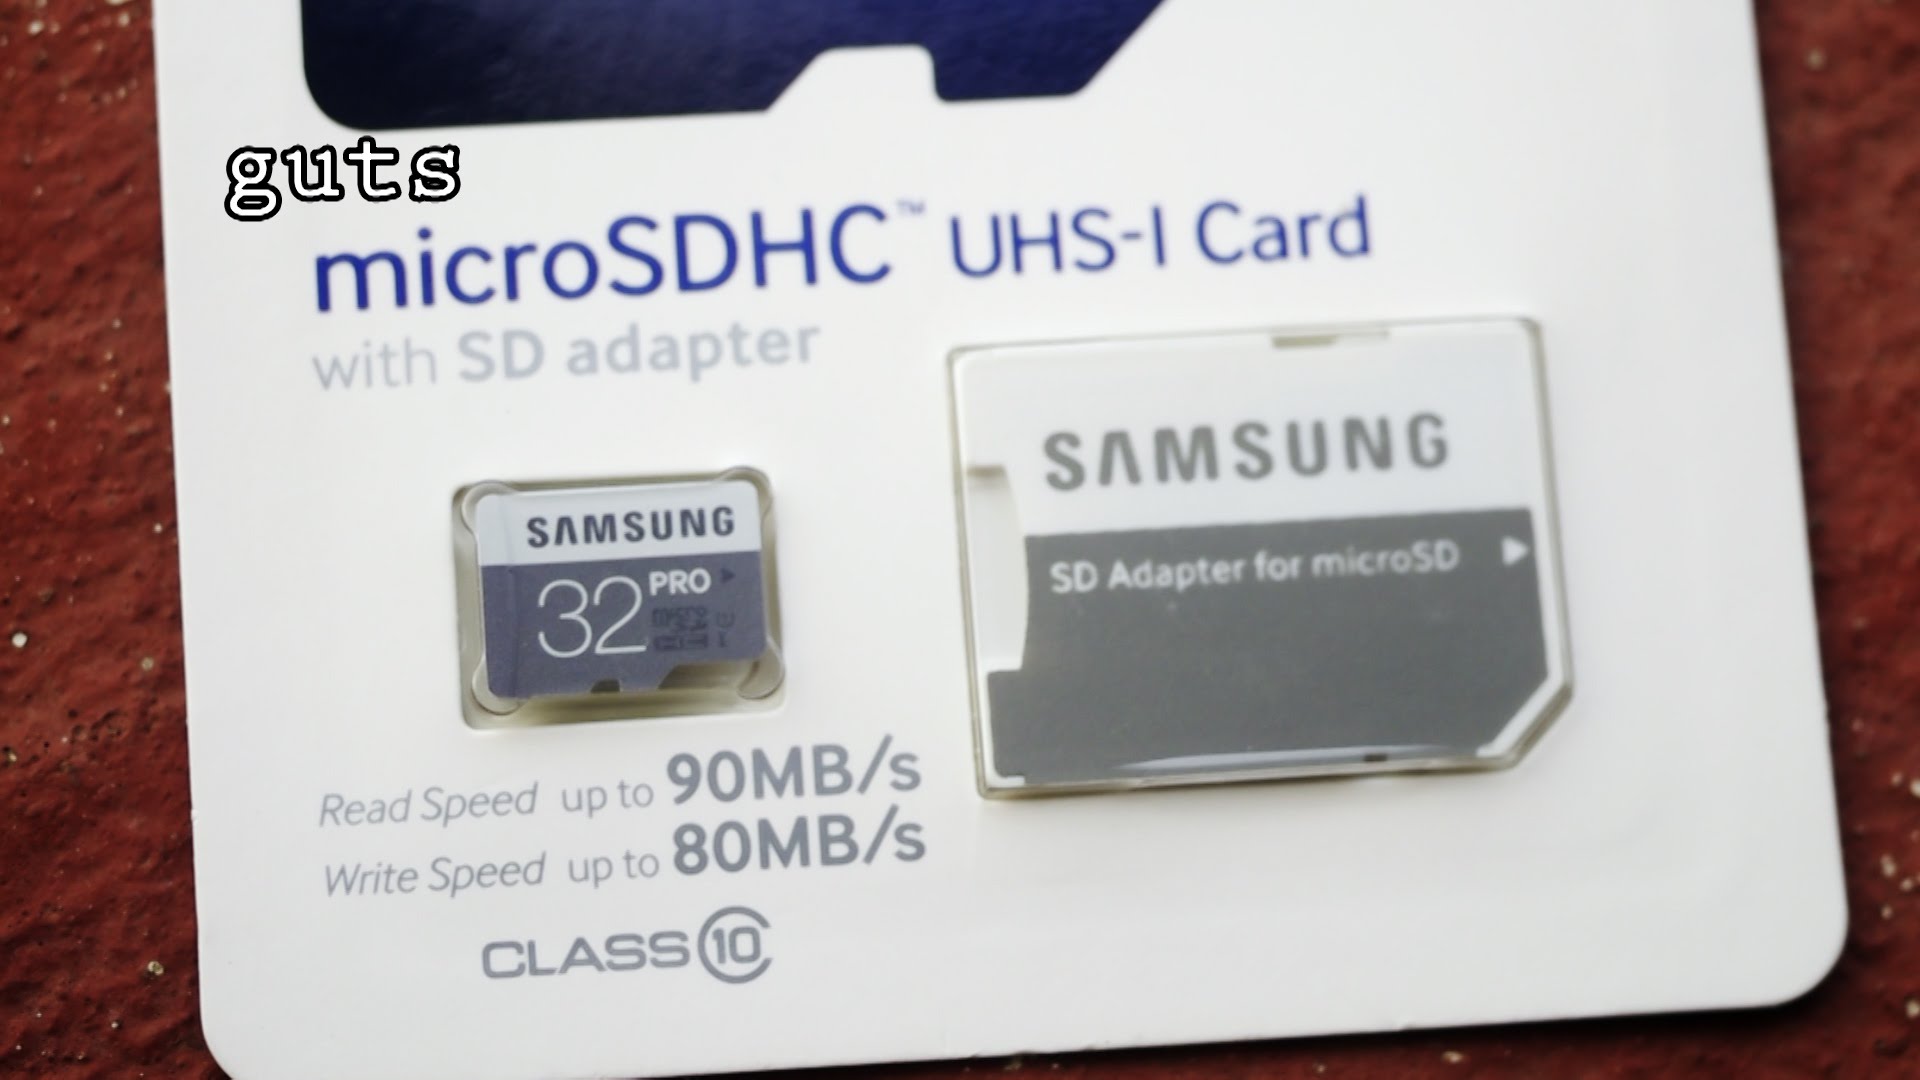 Can a micro SD card, be used in a “DSLR” camera?